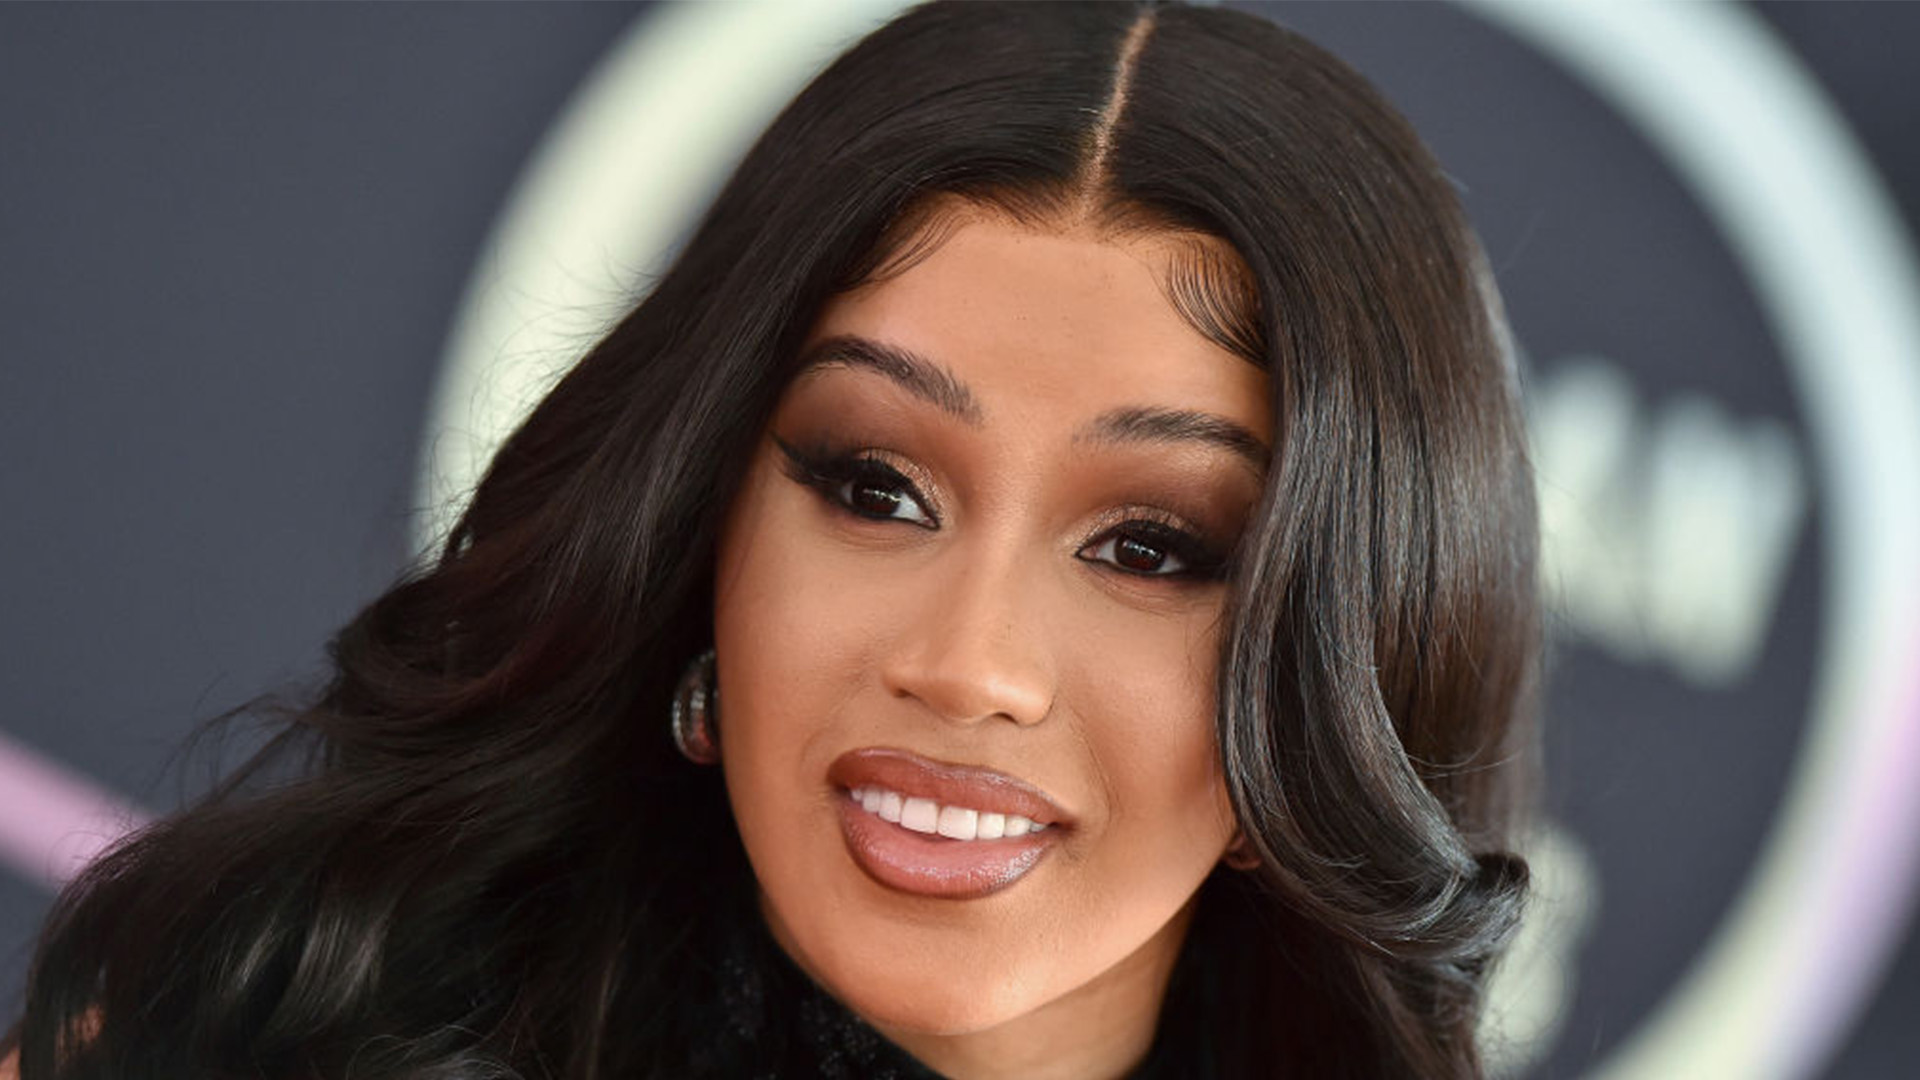 Cardi B Talks Money Moves — 'Ya Might See Me With The Jewelry, But I'm Always Looking At My Account'